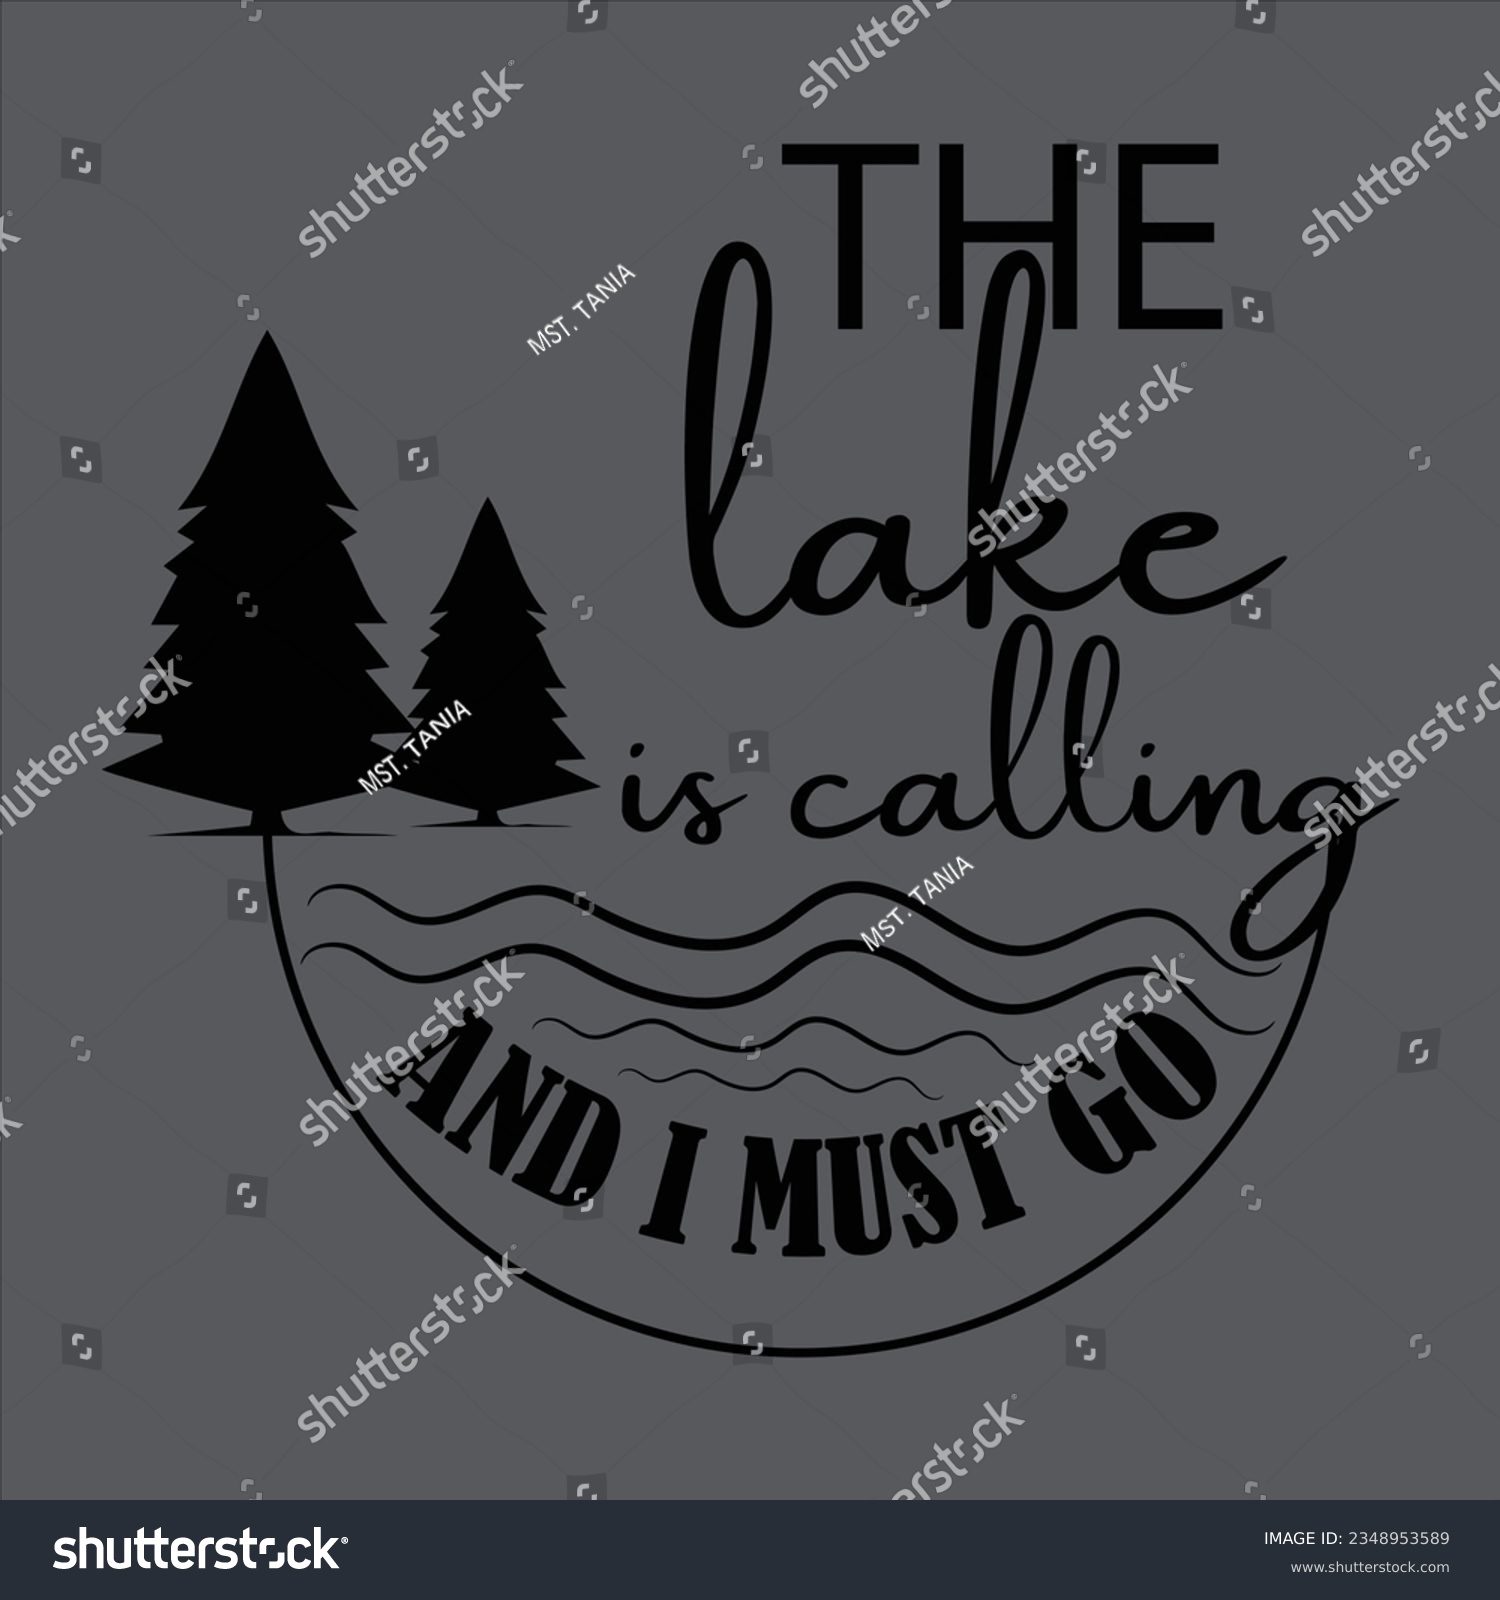 SVG of No lake time svg,the lake is calling,whatever floats your boat,lake life,welcome to our lake house svg,lake bum,the lake is my happy place svg,life is better at the , hair don't care desig. svg